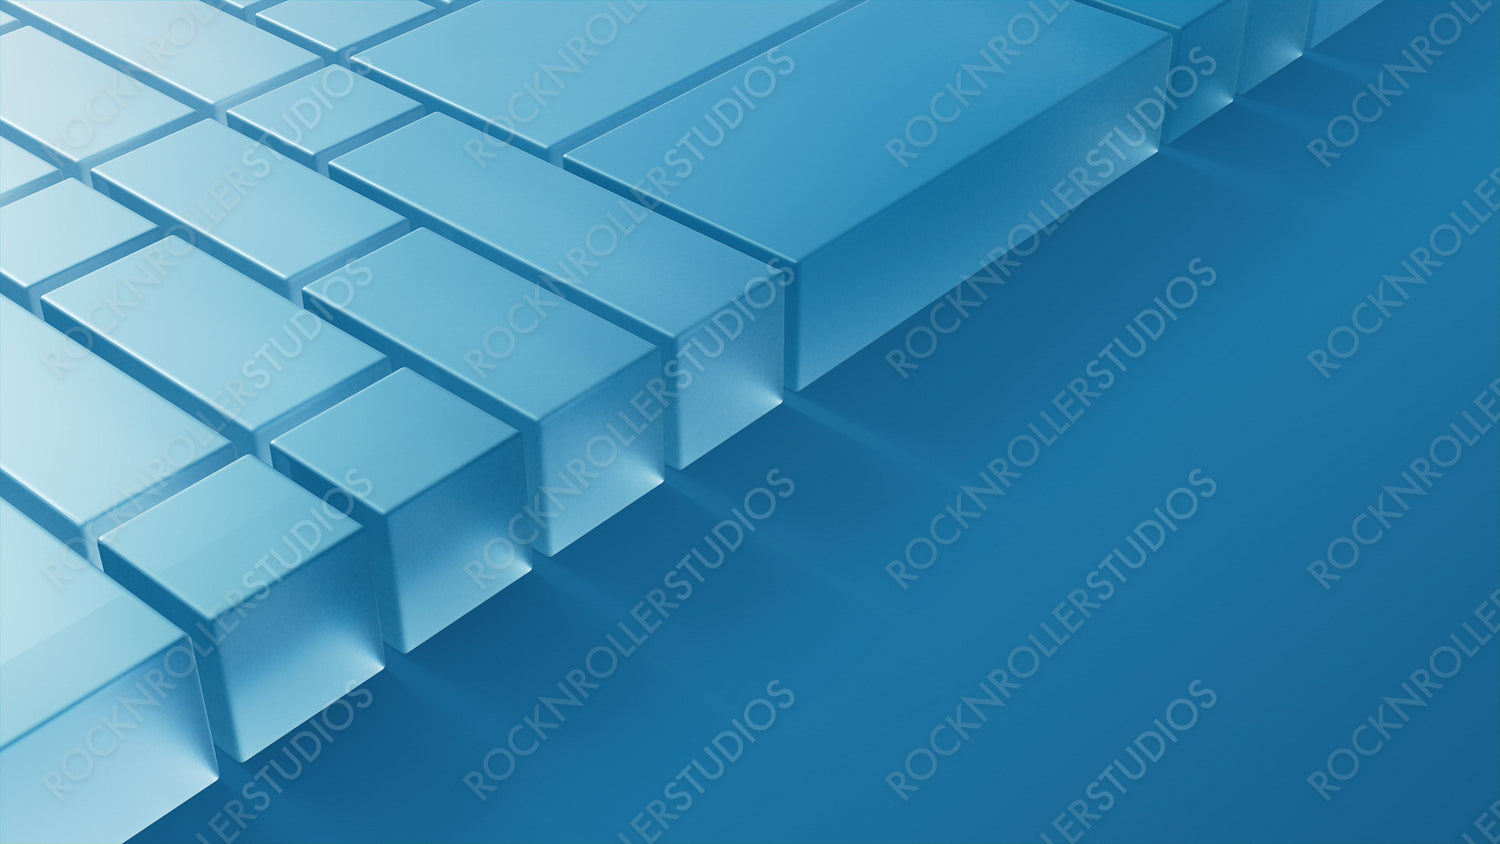 Transparent Blocks on a Blue Surface. Innovative Tech Aesthetic with space for copy. 3D Render.